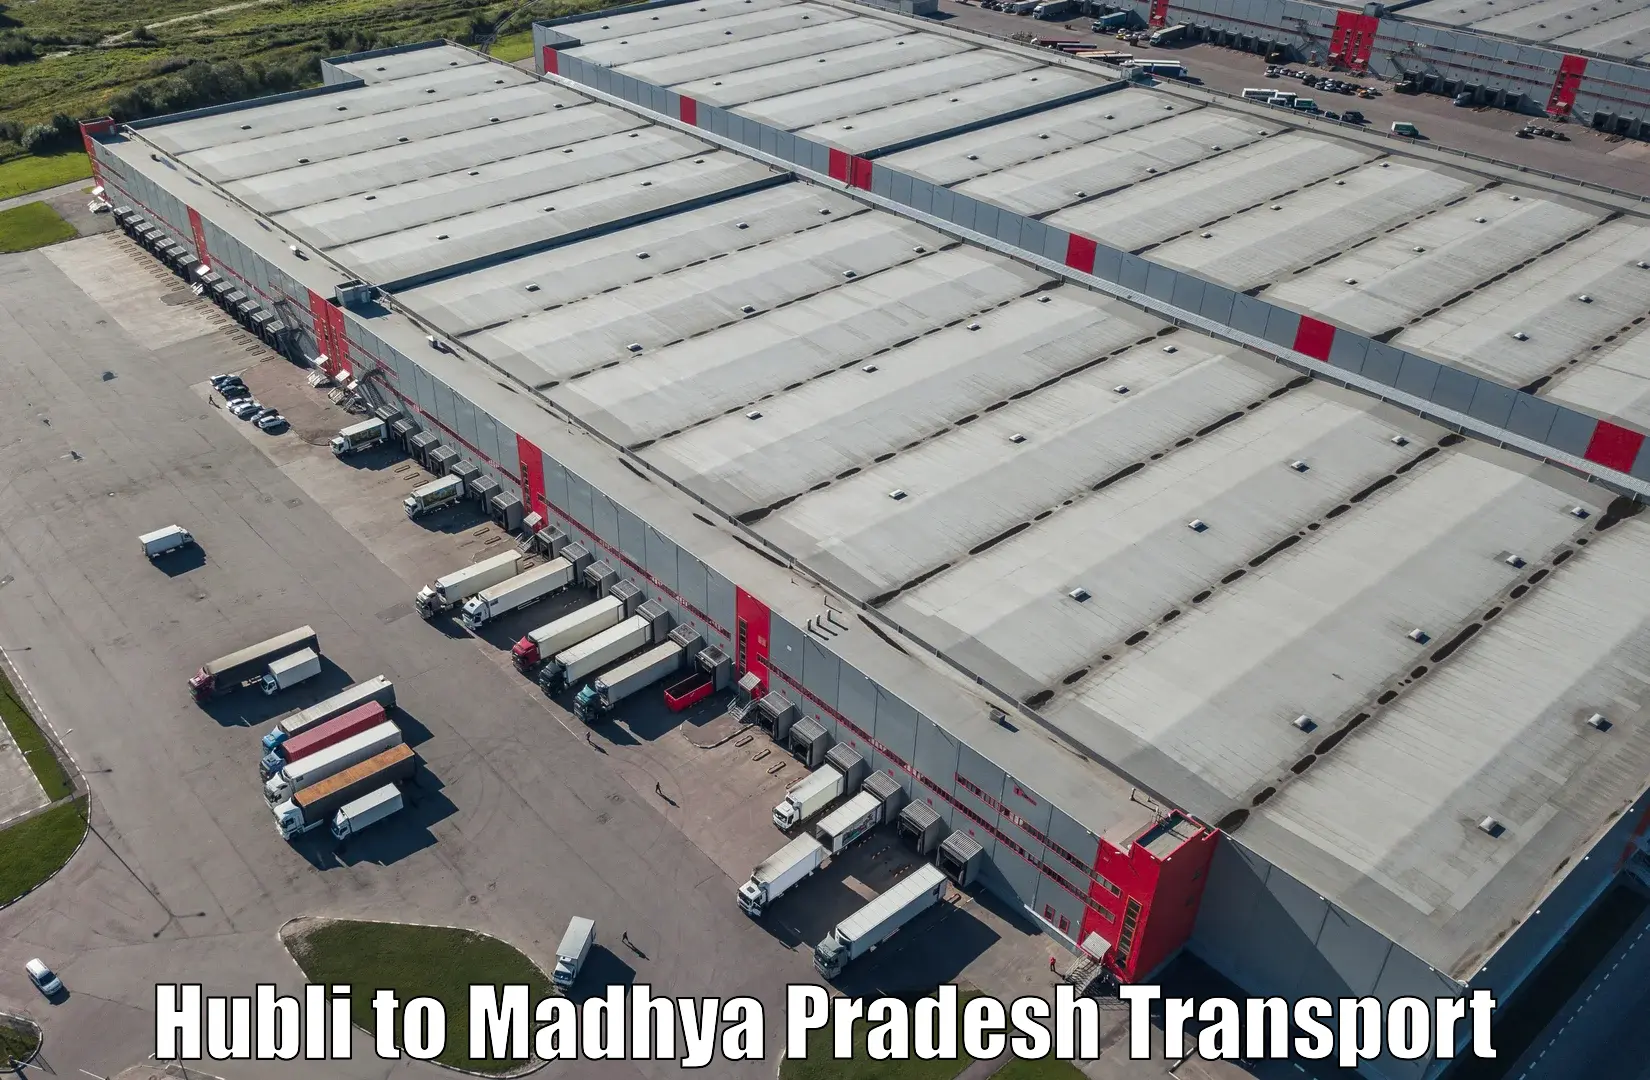 Nationwide transport services Hubli to Bhopal